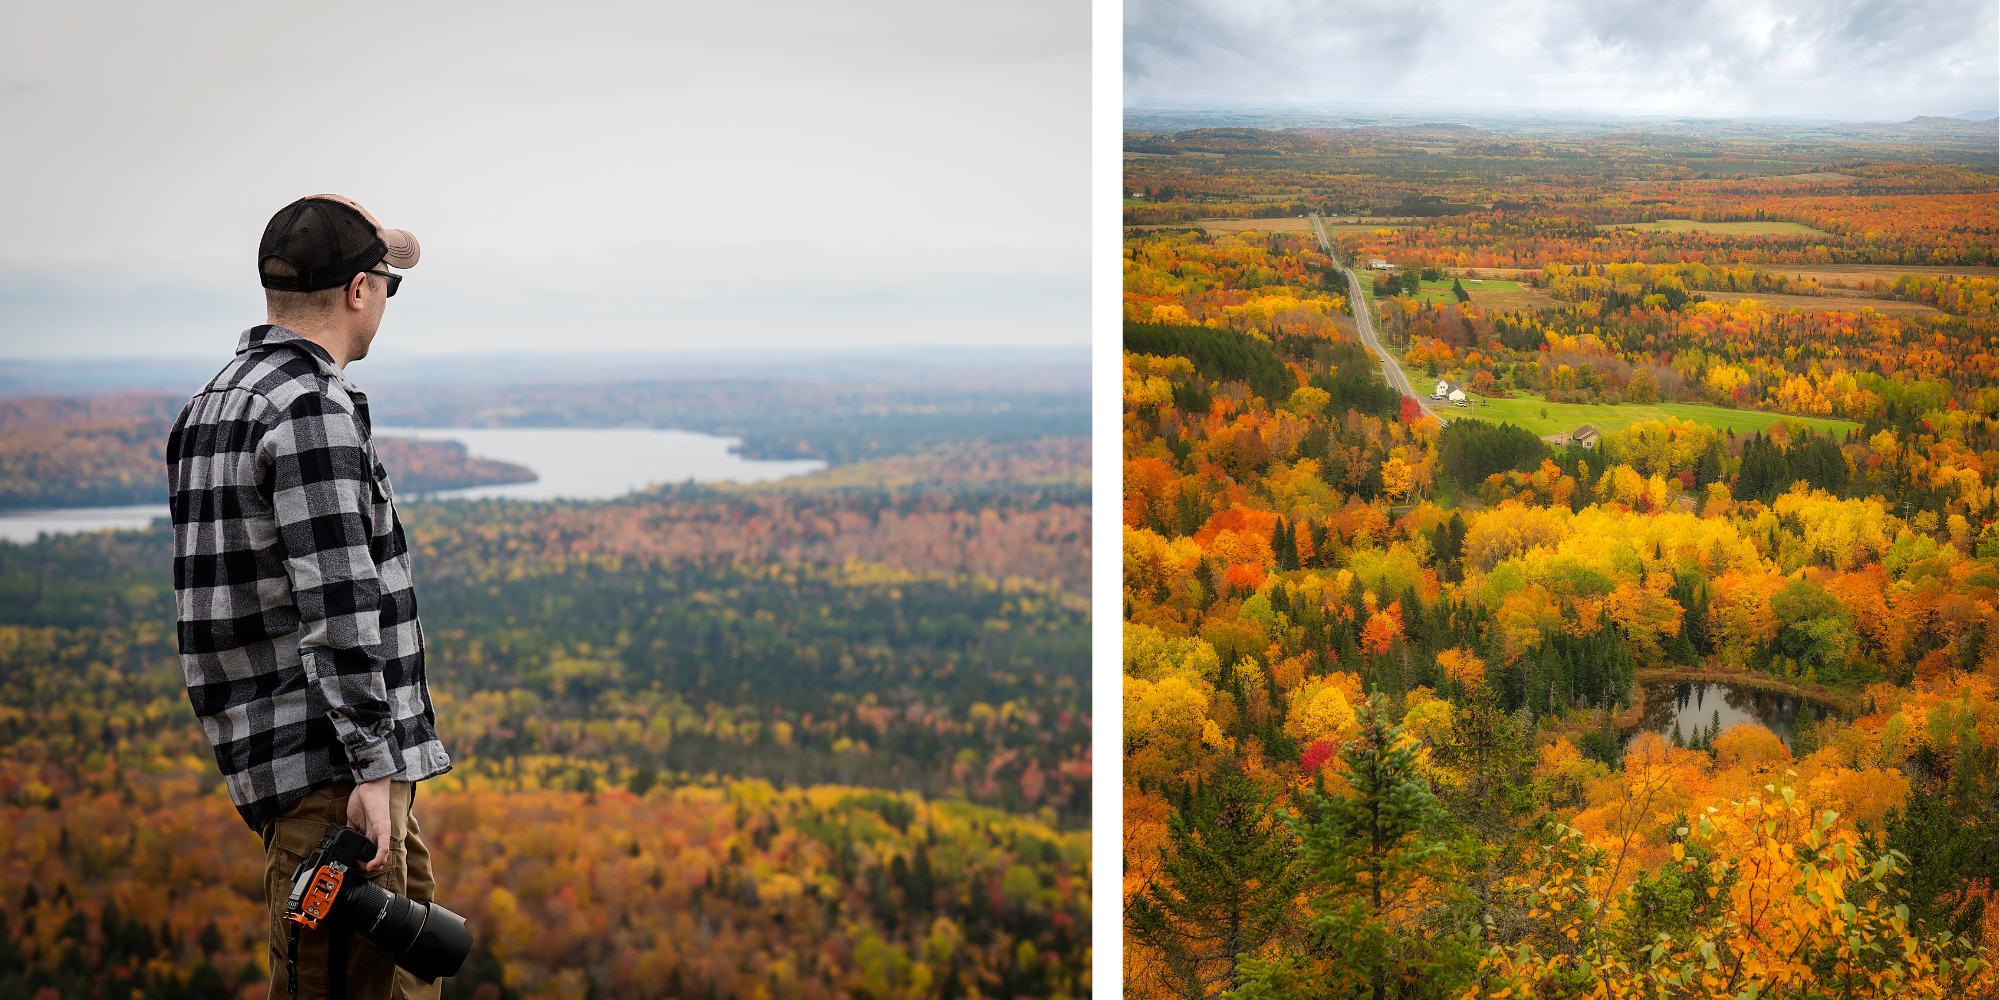 The top of Haystack Mountain offers uninteruped views of vibrant colors.